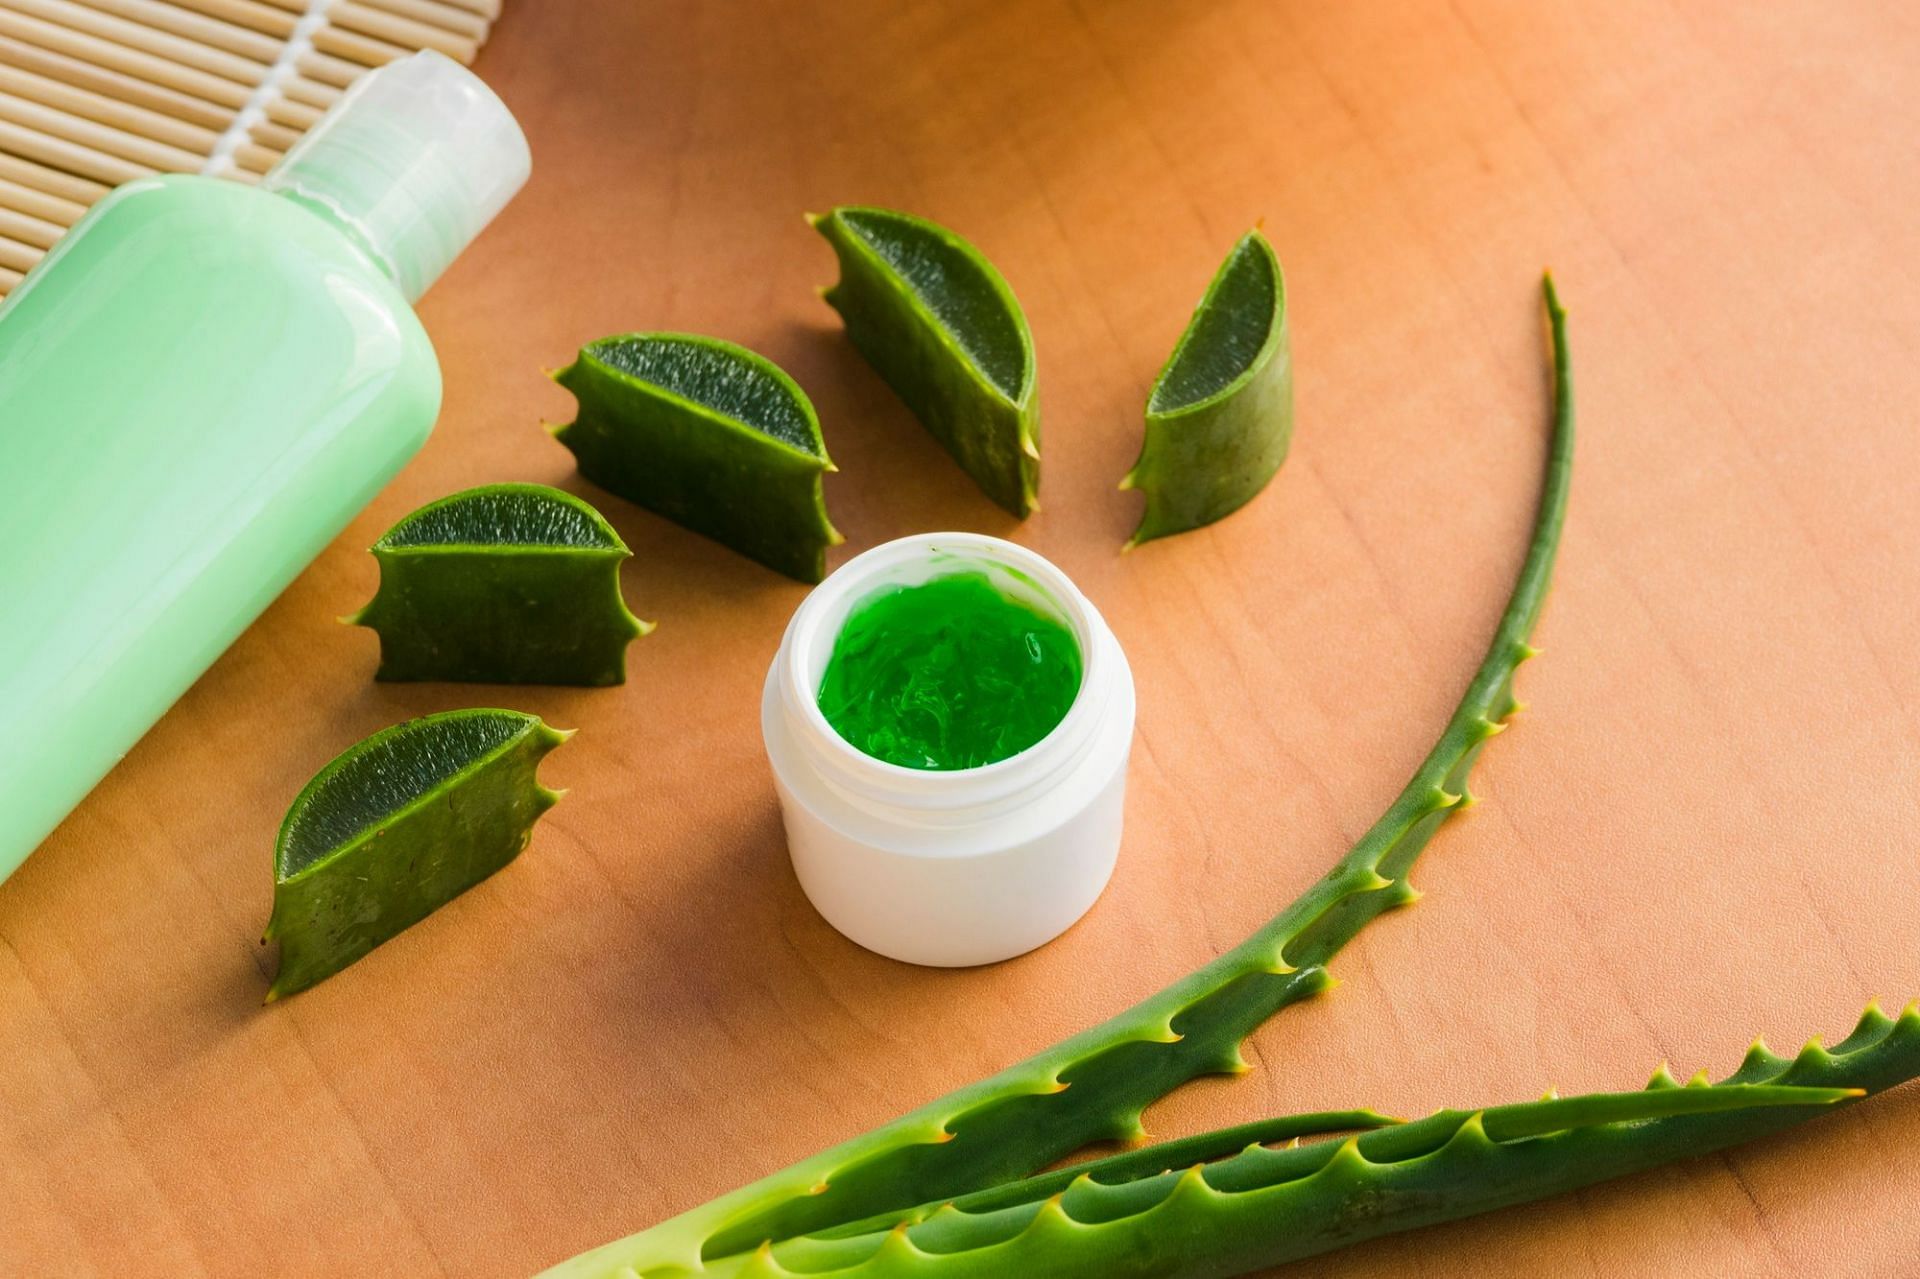 Aloe Vera gel can be used for sore skin, pimples and acne treatment as well (Image by Freepik on Freepik)